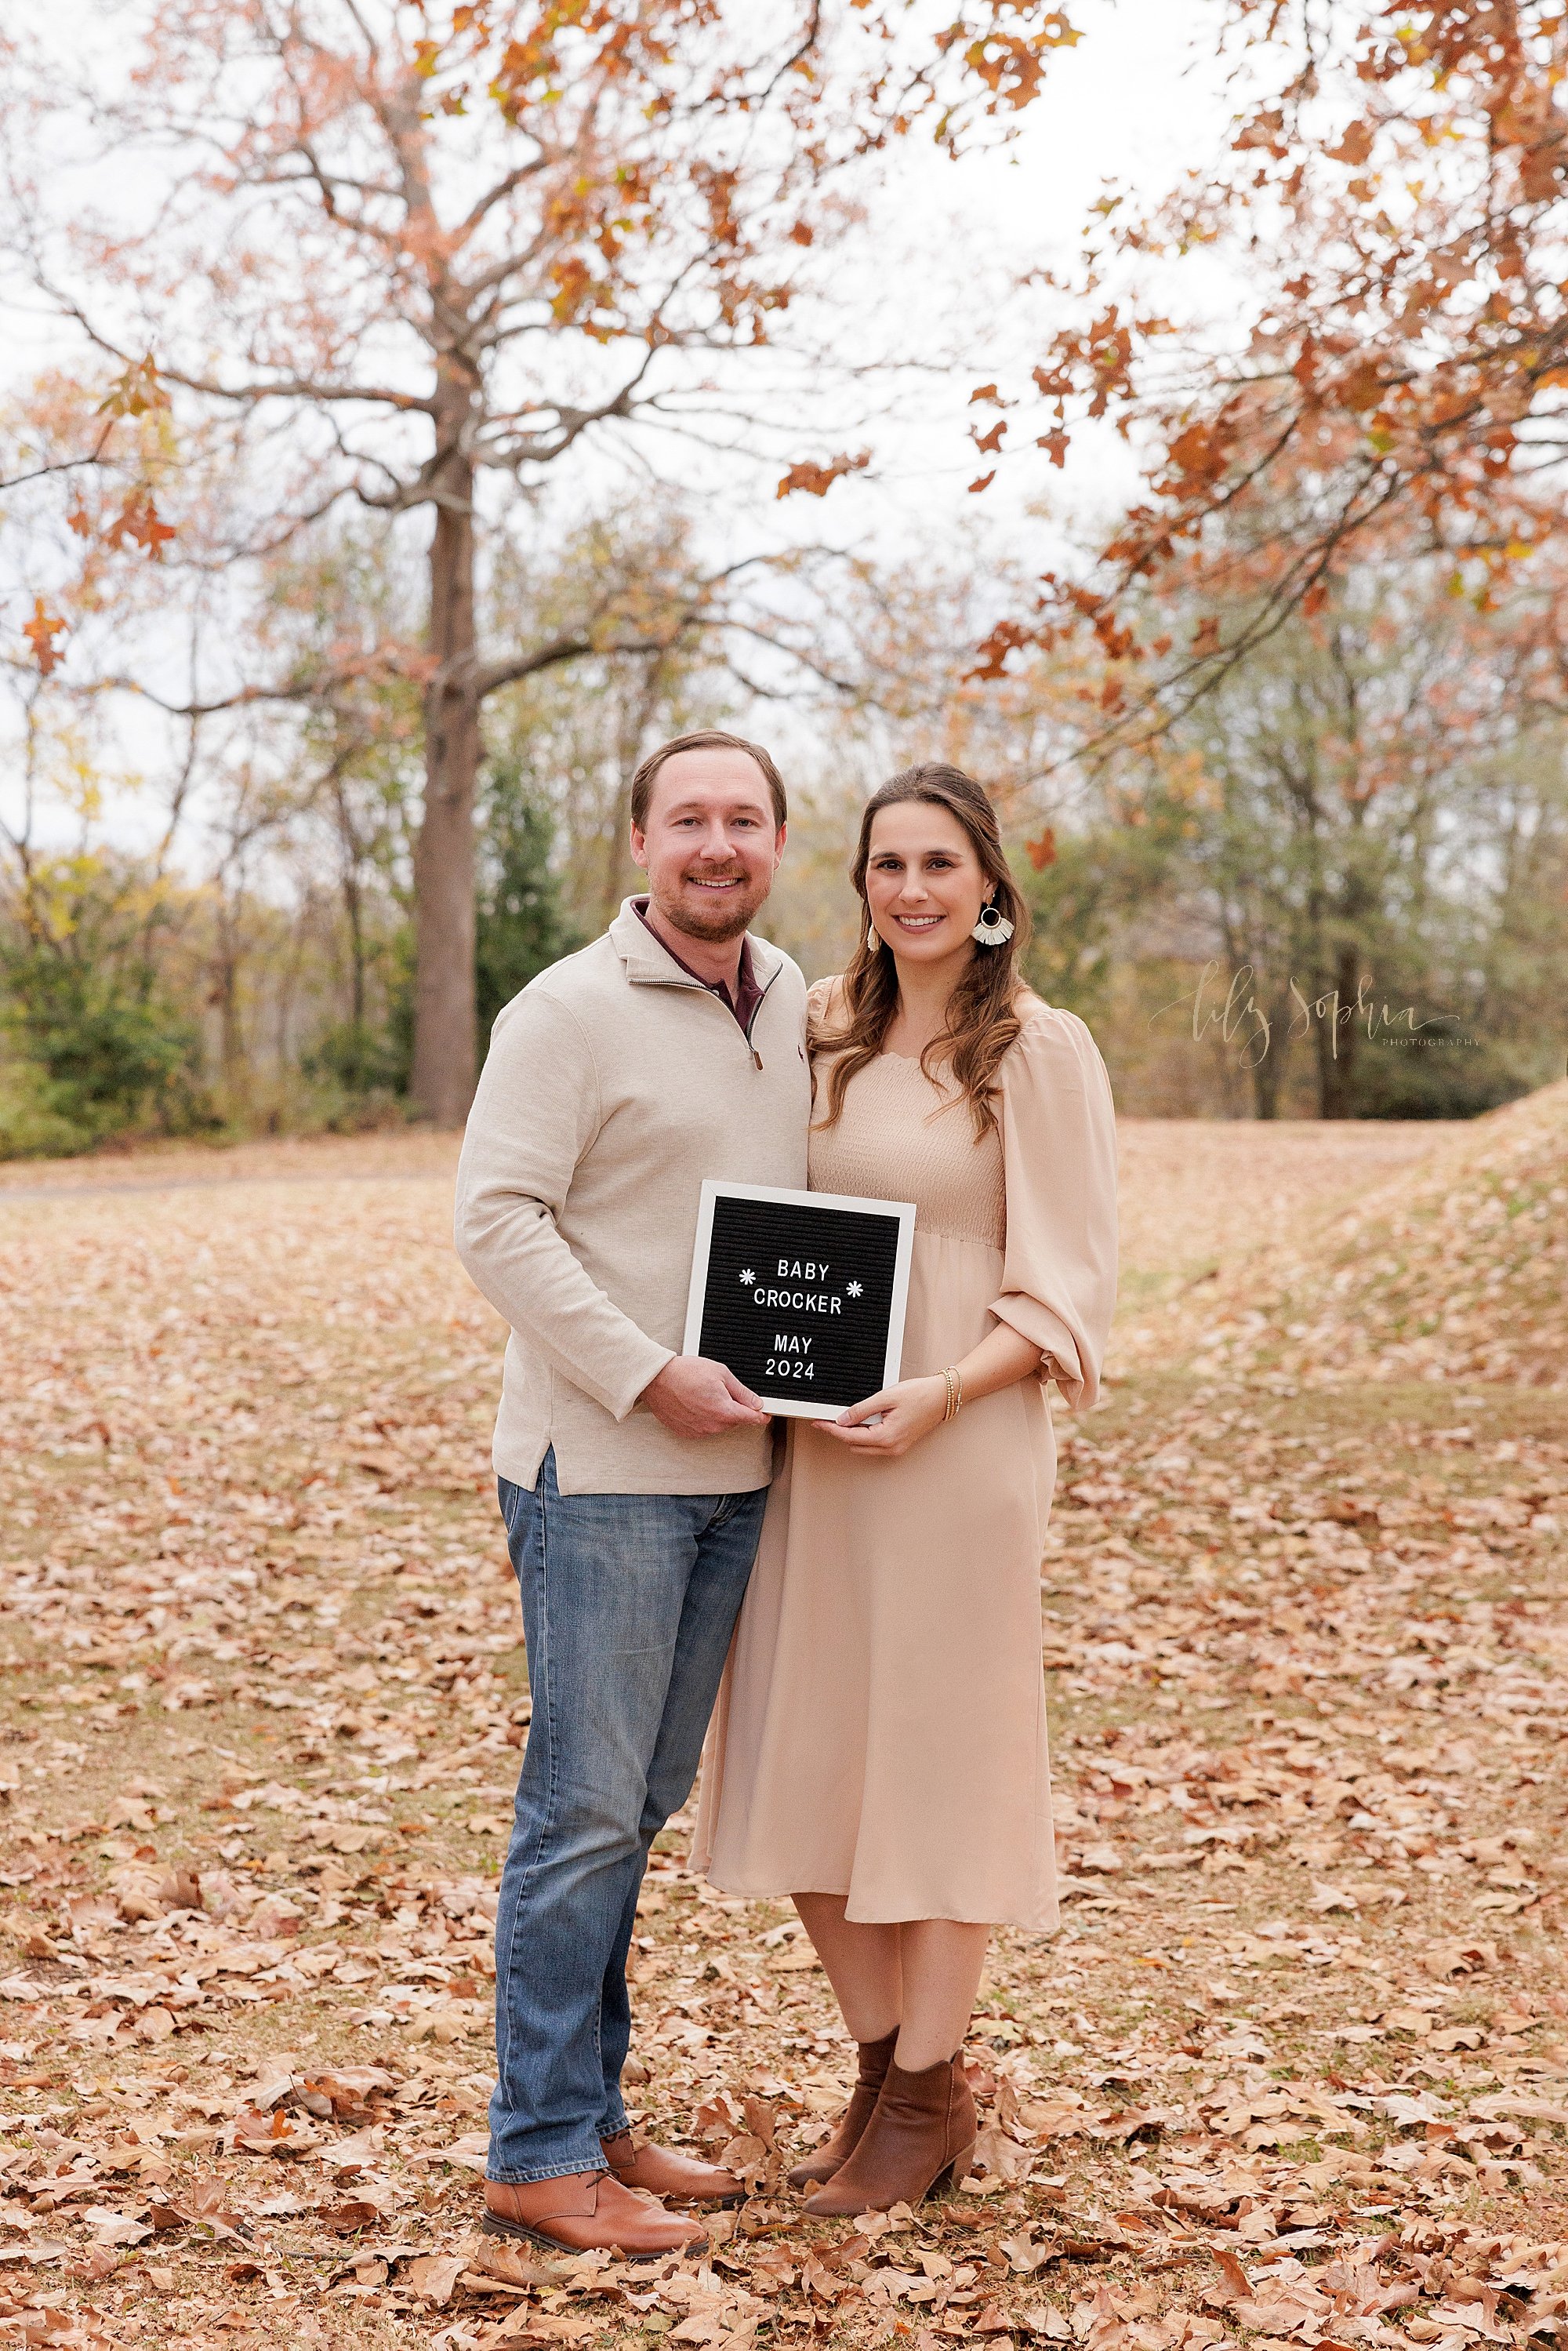 intown-atlanta-morningside-decatur-brookhaven-buckhead-outdoor-couples-maternity-fall-photoshoot-daschunds-doxies-gender-reveal_6188.jpg